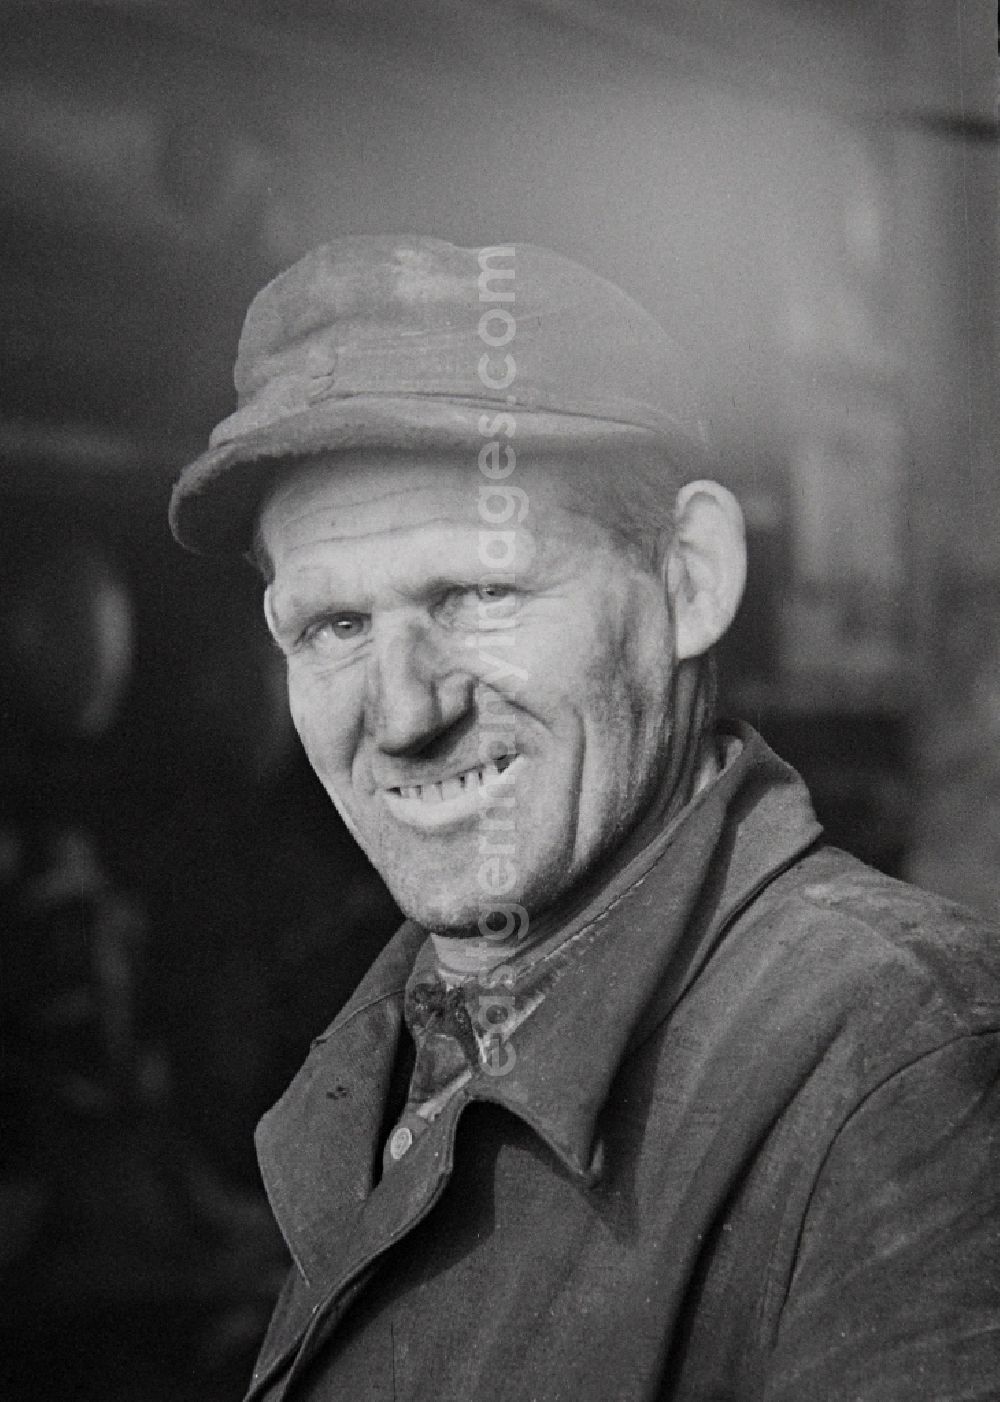 GDR picture archive: Halberstadt - Portrait photographer Shed fire man Ernst Struempel in Halberstadt in the state Saxony-Anhalt on the territory of the former GDR, German Democratic Republic